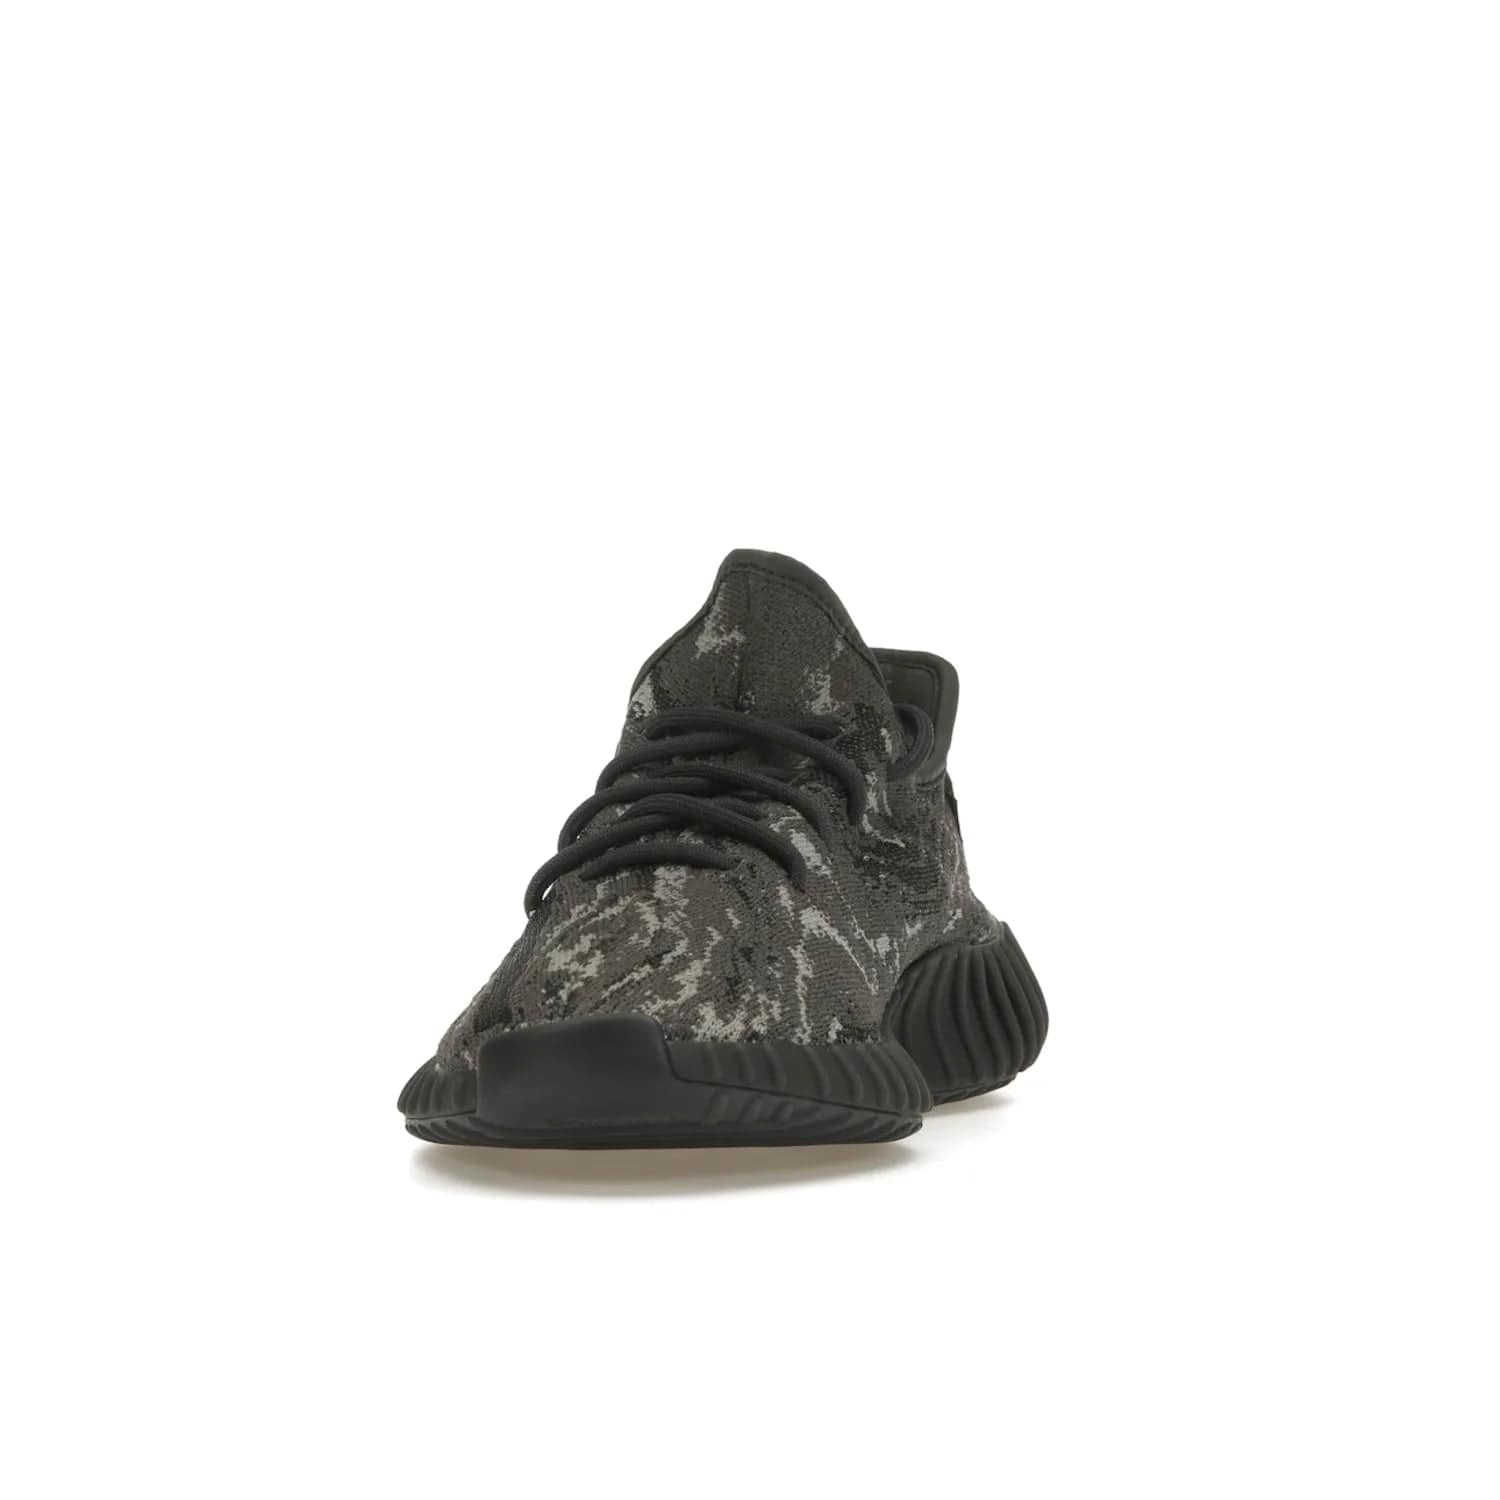 adidas Yeezy Boost 350 V2 MX Dark Salt - Image 12 - Only at www.BallersClubKickz.com - ##
The adidas Yeezy Boost 350 V2 MX Dark Salt offers a contemporary look with a signature combination of grey and black hues. Cushioned Boost midsole and side stripe allow for all day wear. Get the perfect fashion-forward addition with this sleek sneaker for $230.